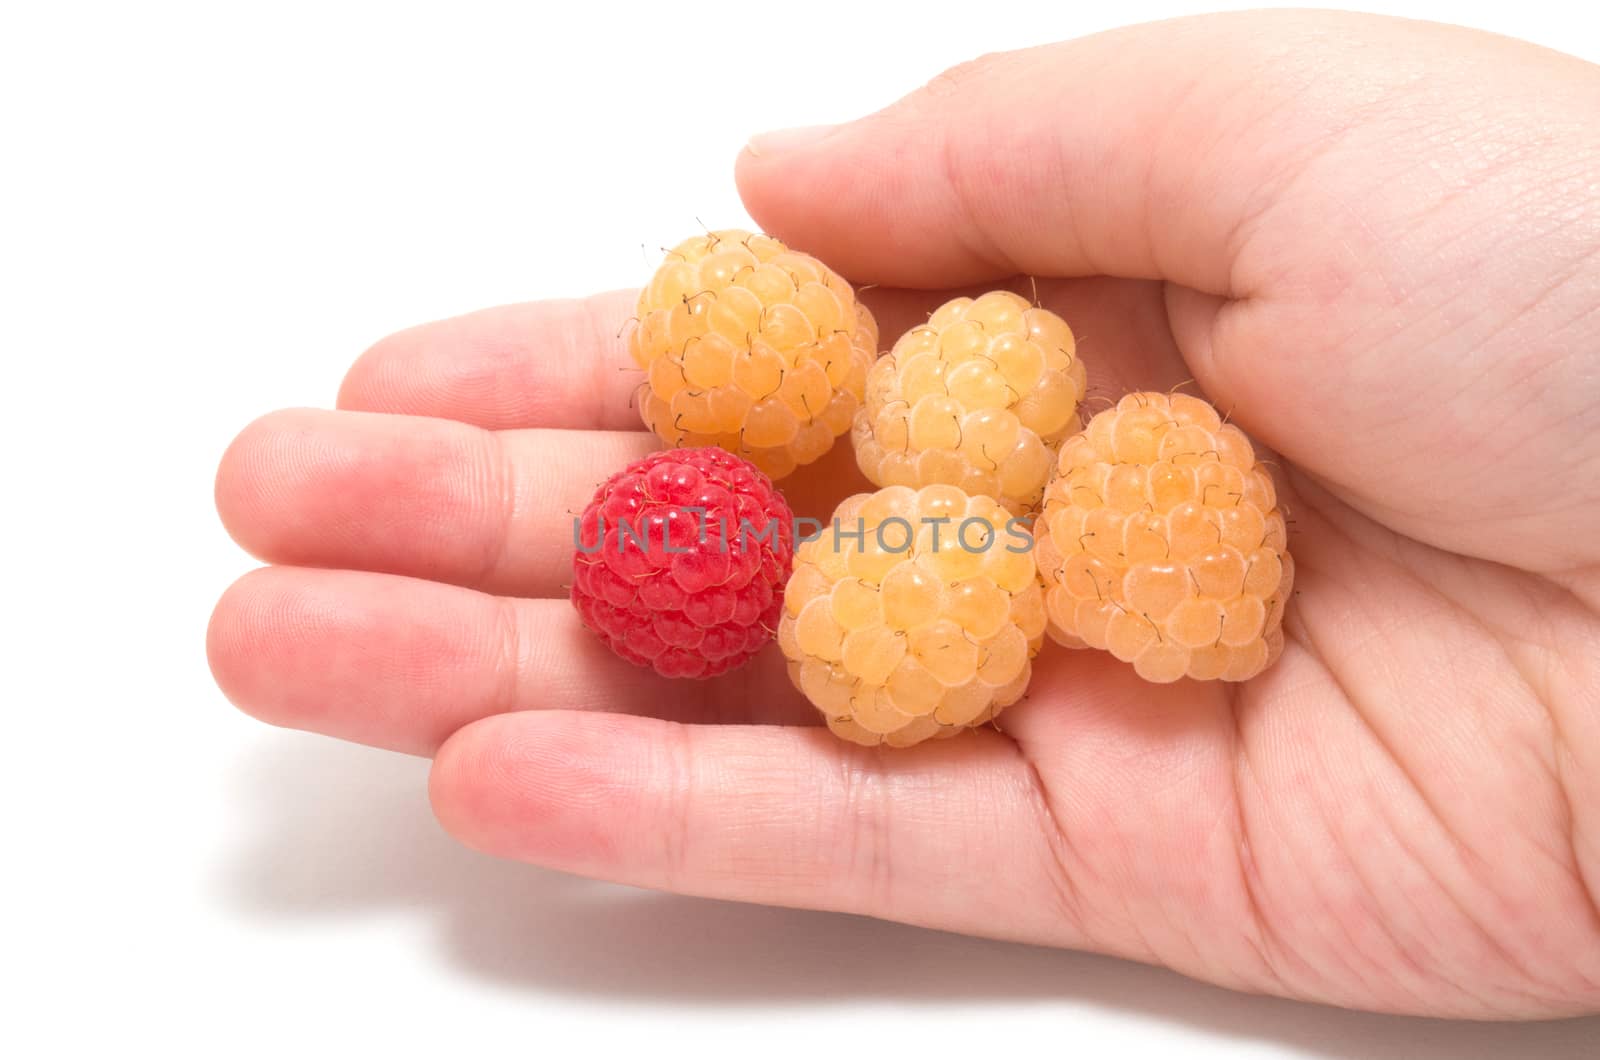 Child hand holding four yellow raspberries and a red one